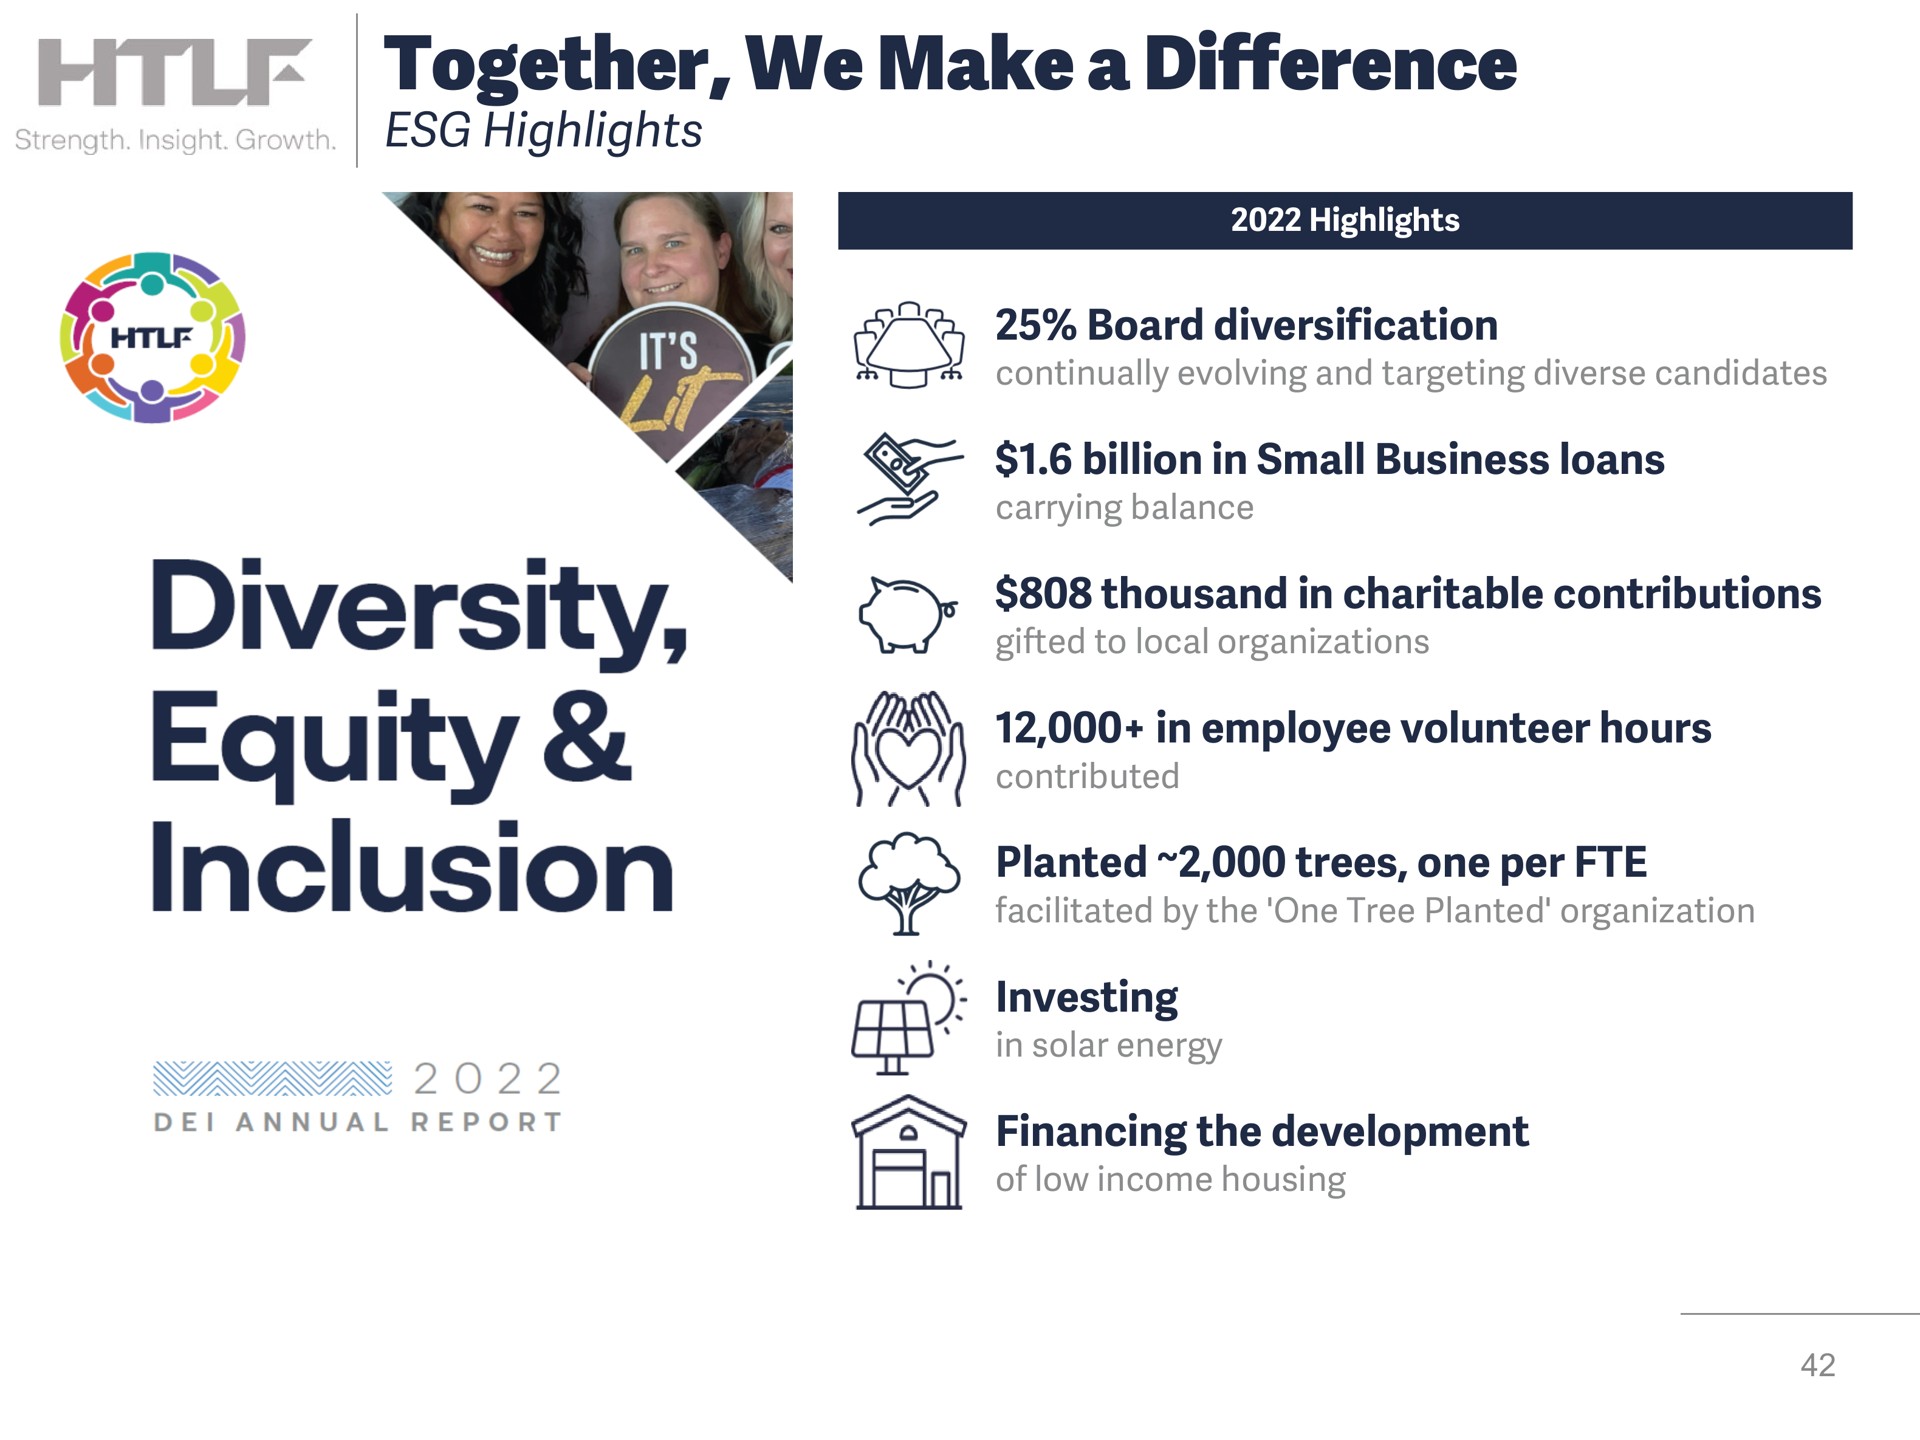 together we make a difference highlights board diversification billion in small business loans thousand in charitable contributions in employee volunteer hours planted trees one per investing financing the development diversity inclusion | Heartland Financial USA